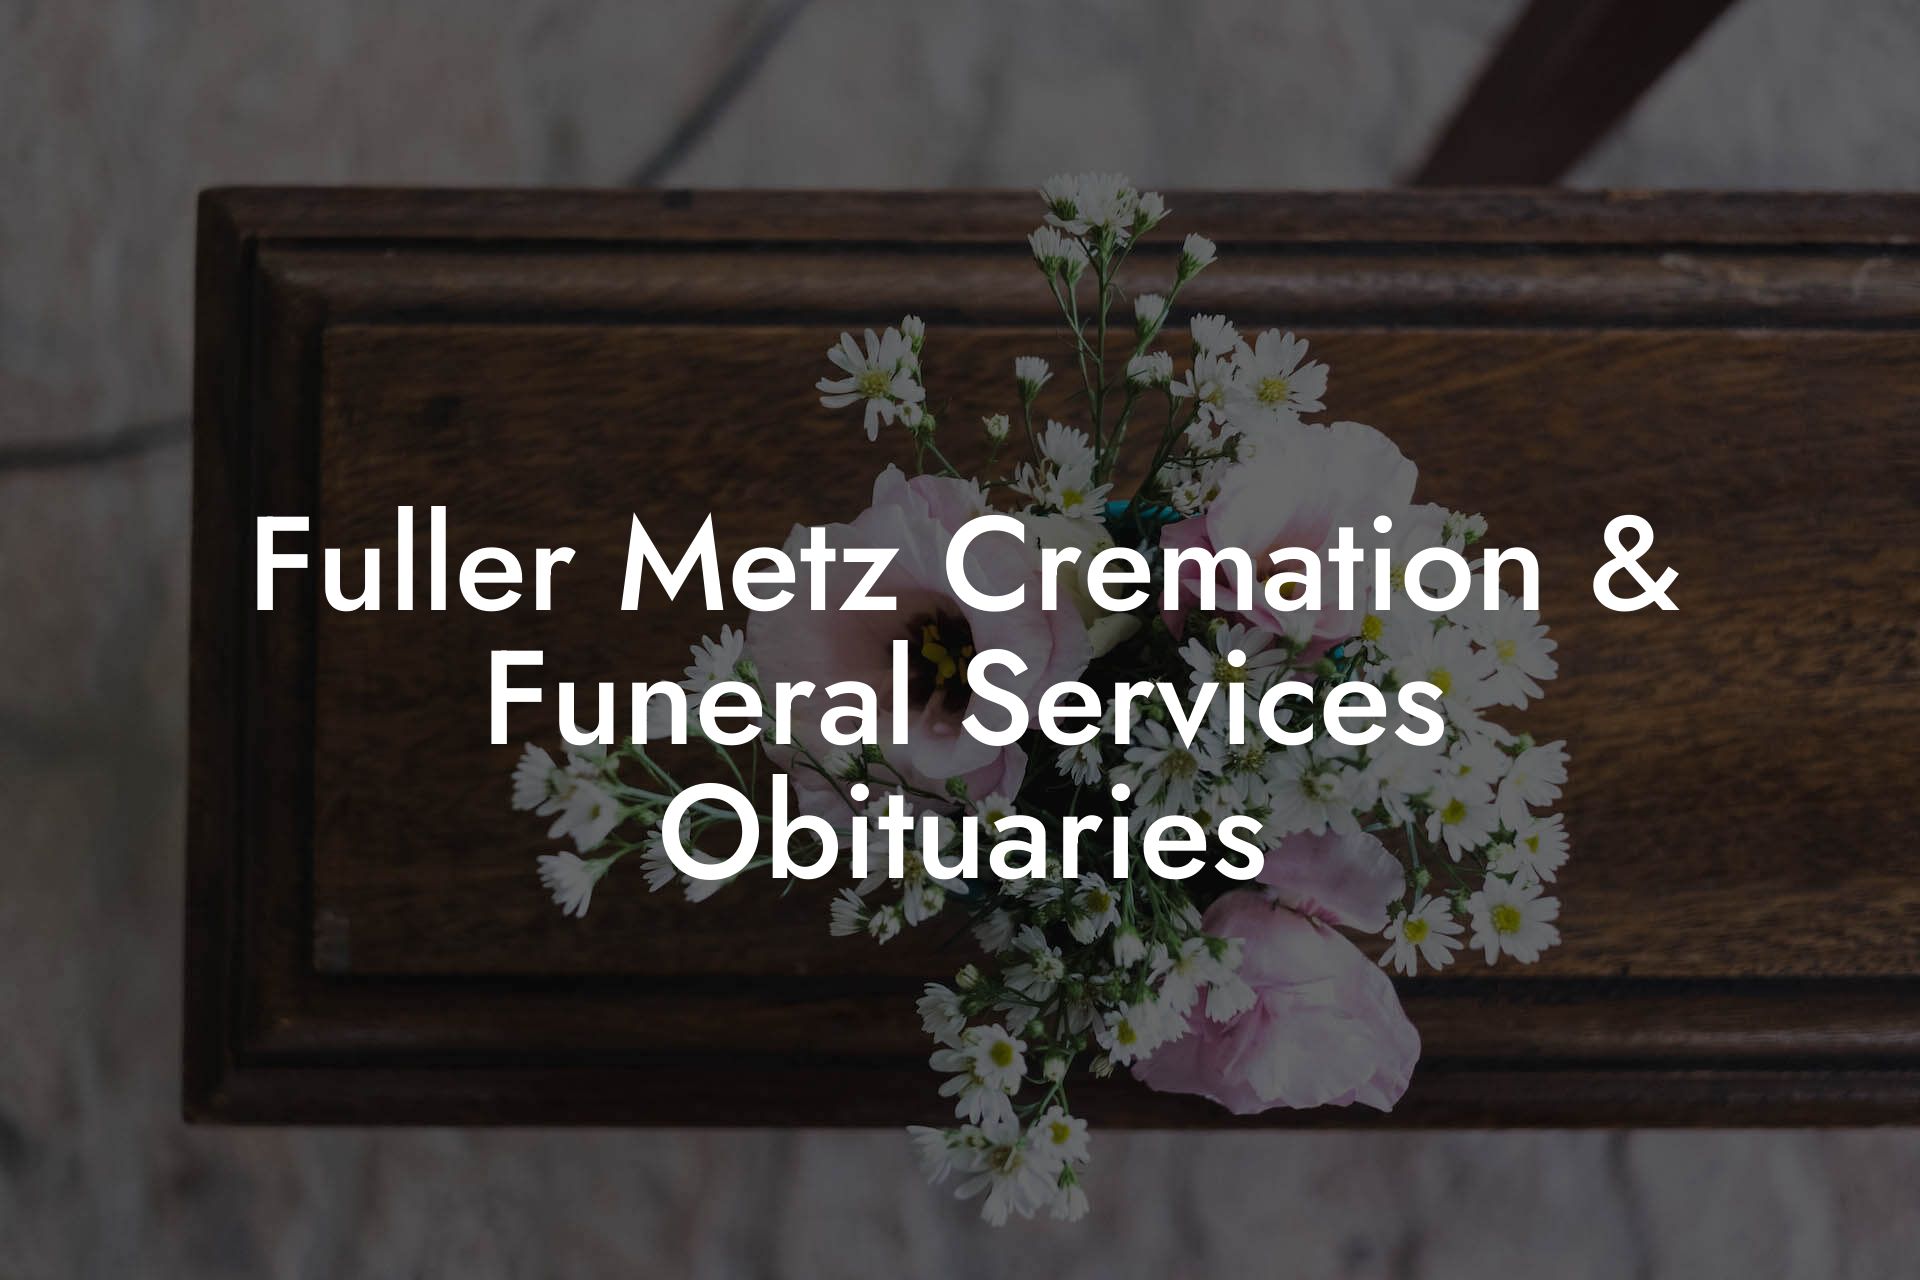 Fuller Metz Cremation & Funeral Services Obituaries